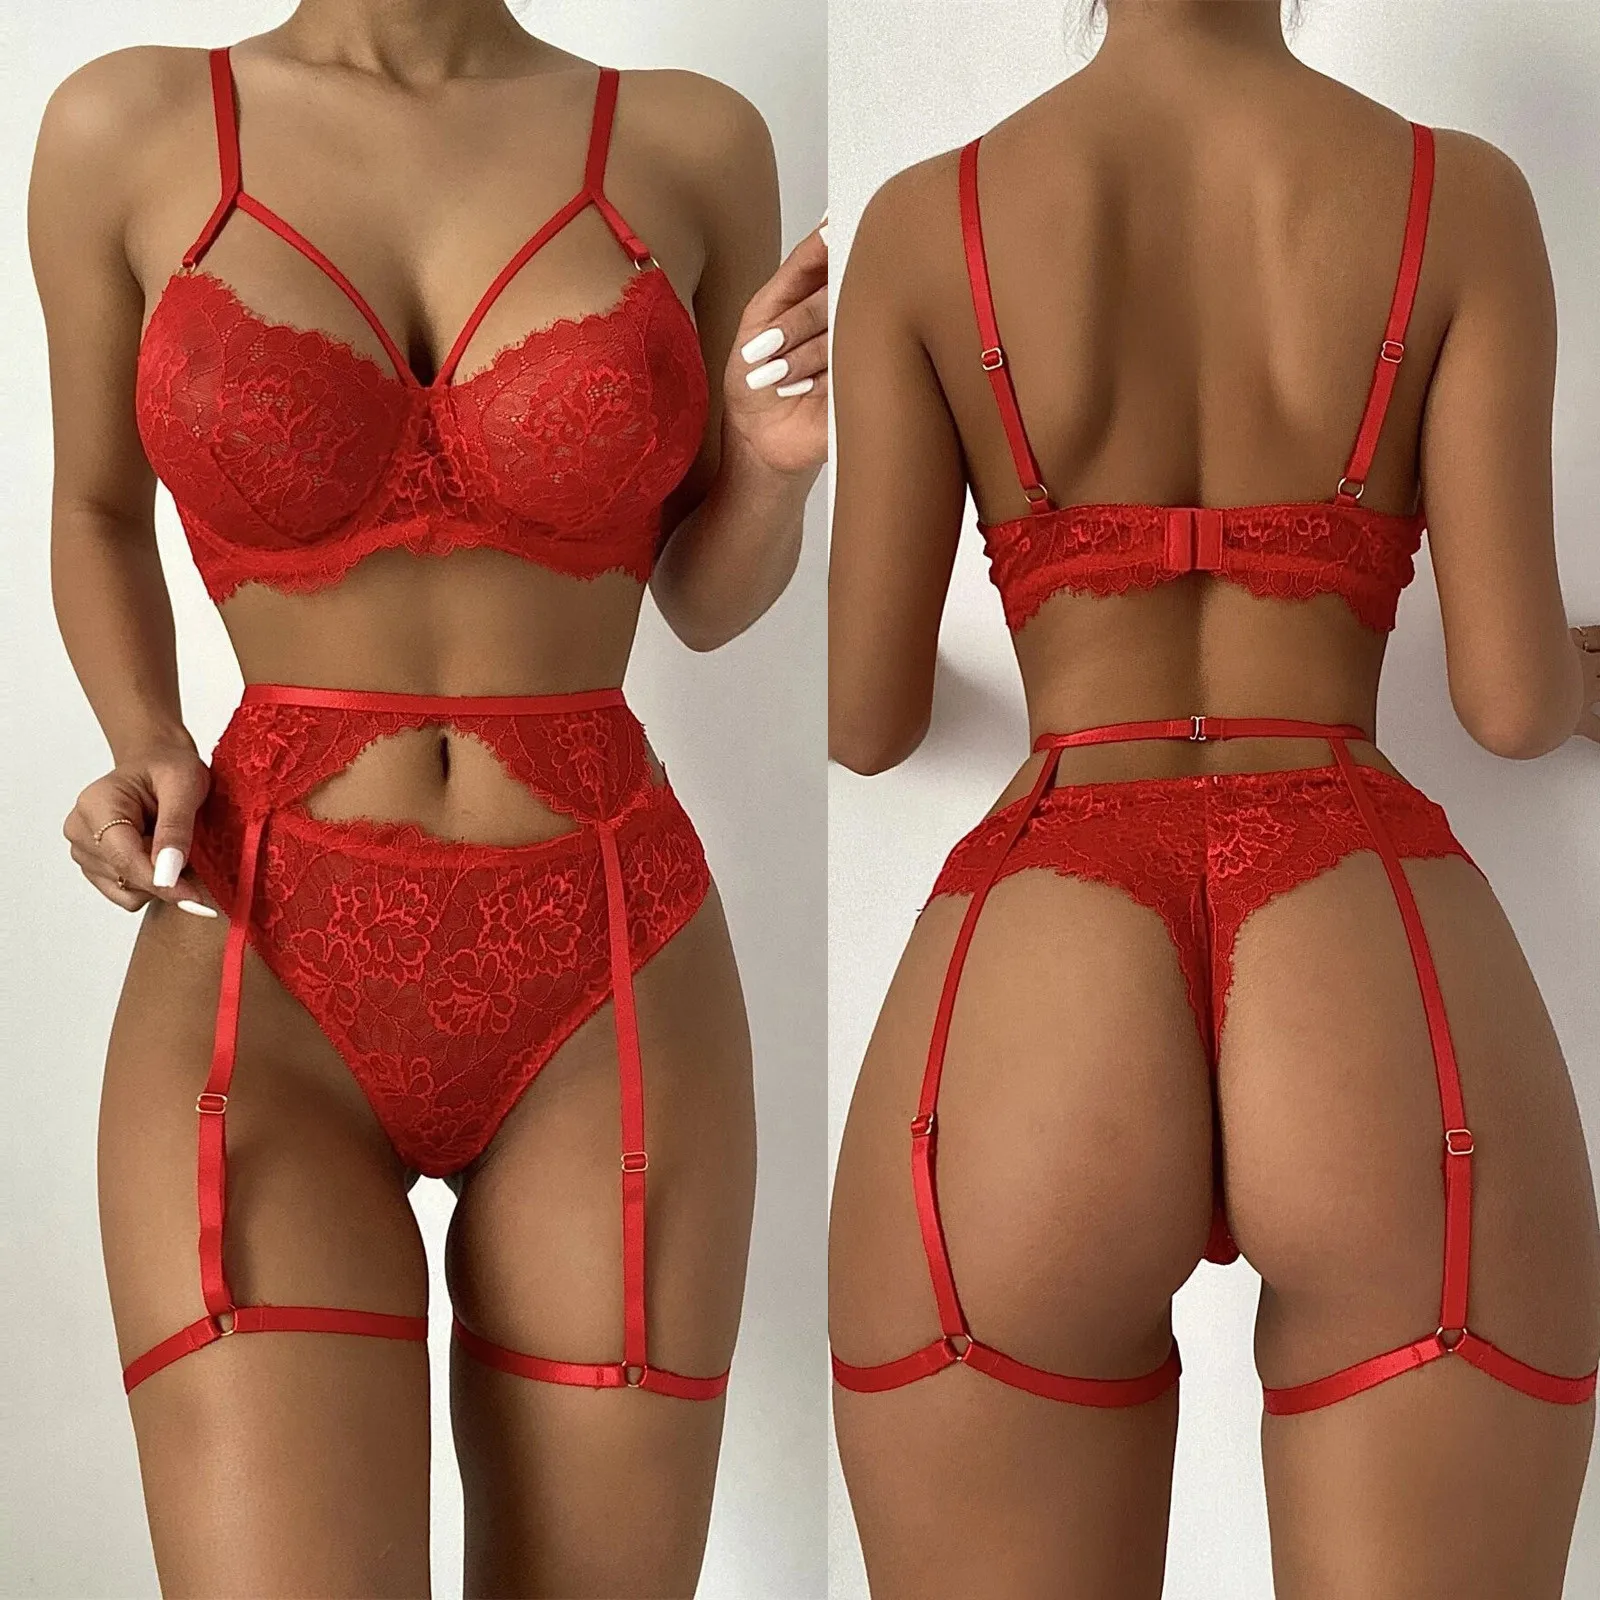 

3PC Sexy Lingerie Set Cut-out Lace Bra Thong Garter Women's Underwear Set Erotic Lingerie Sexy Costumes Lenceria Sensual Mujer